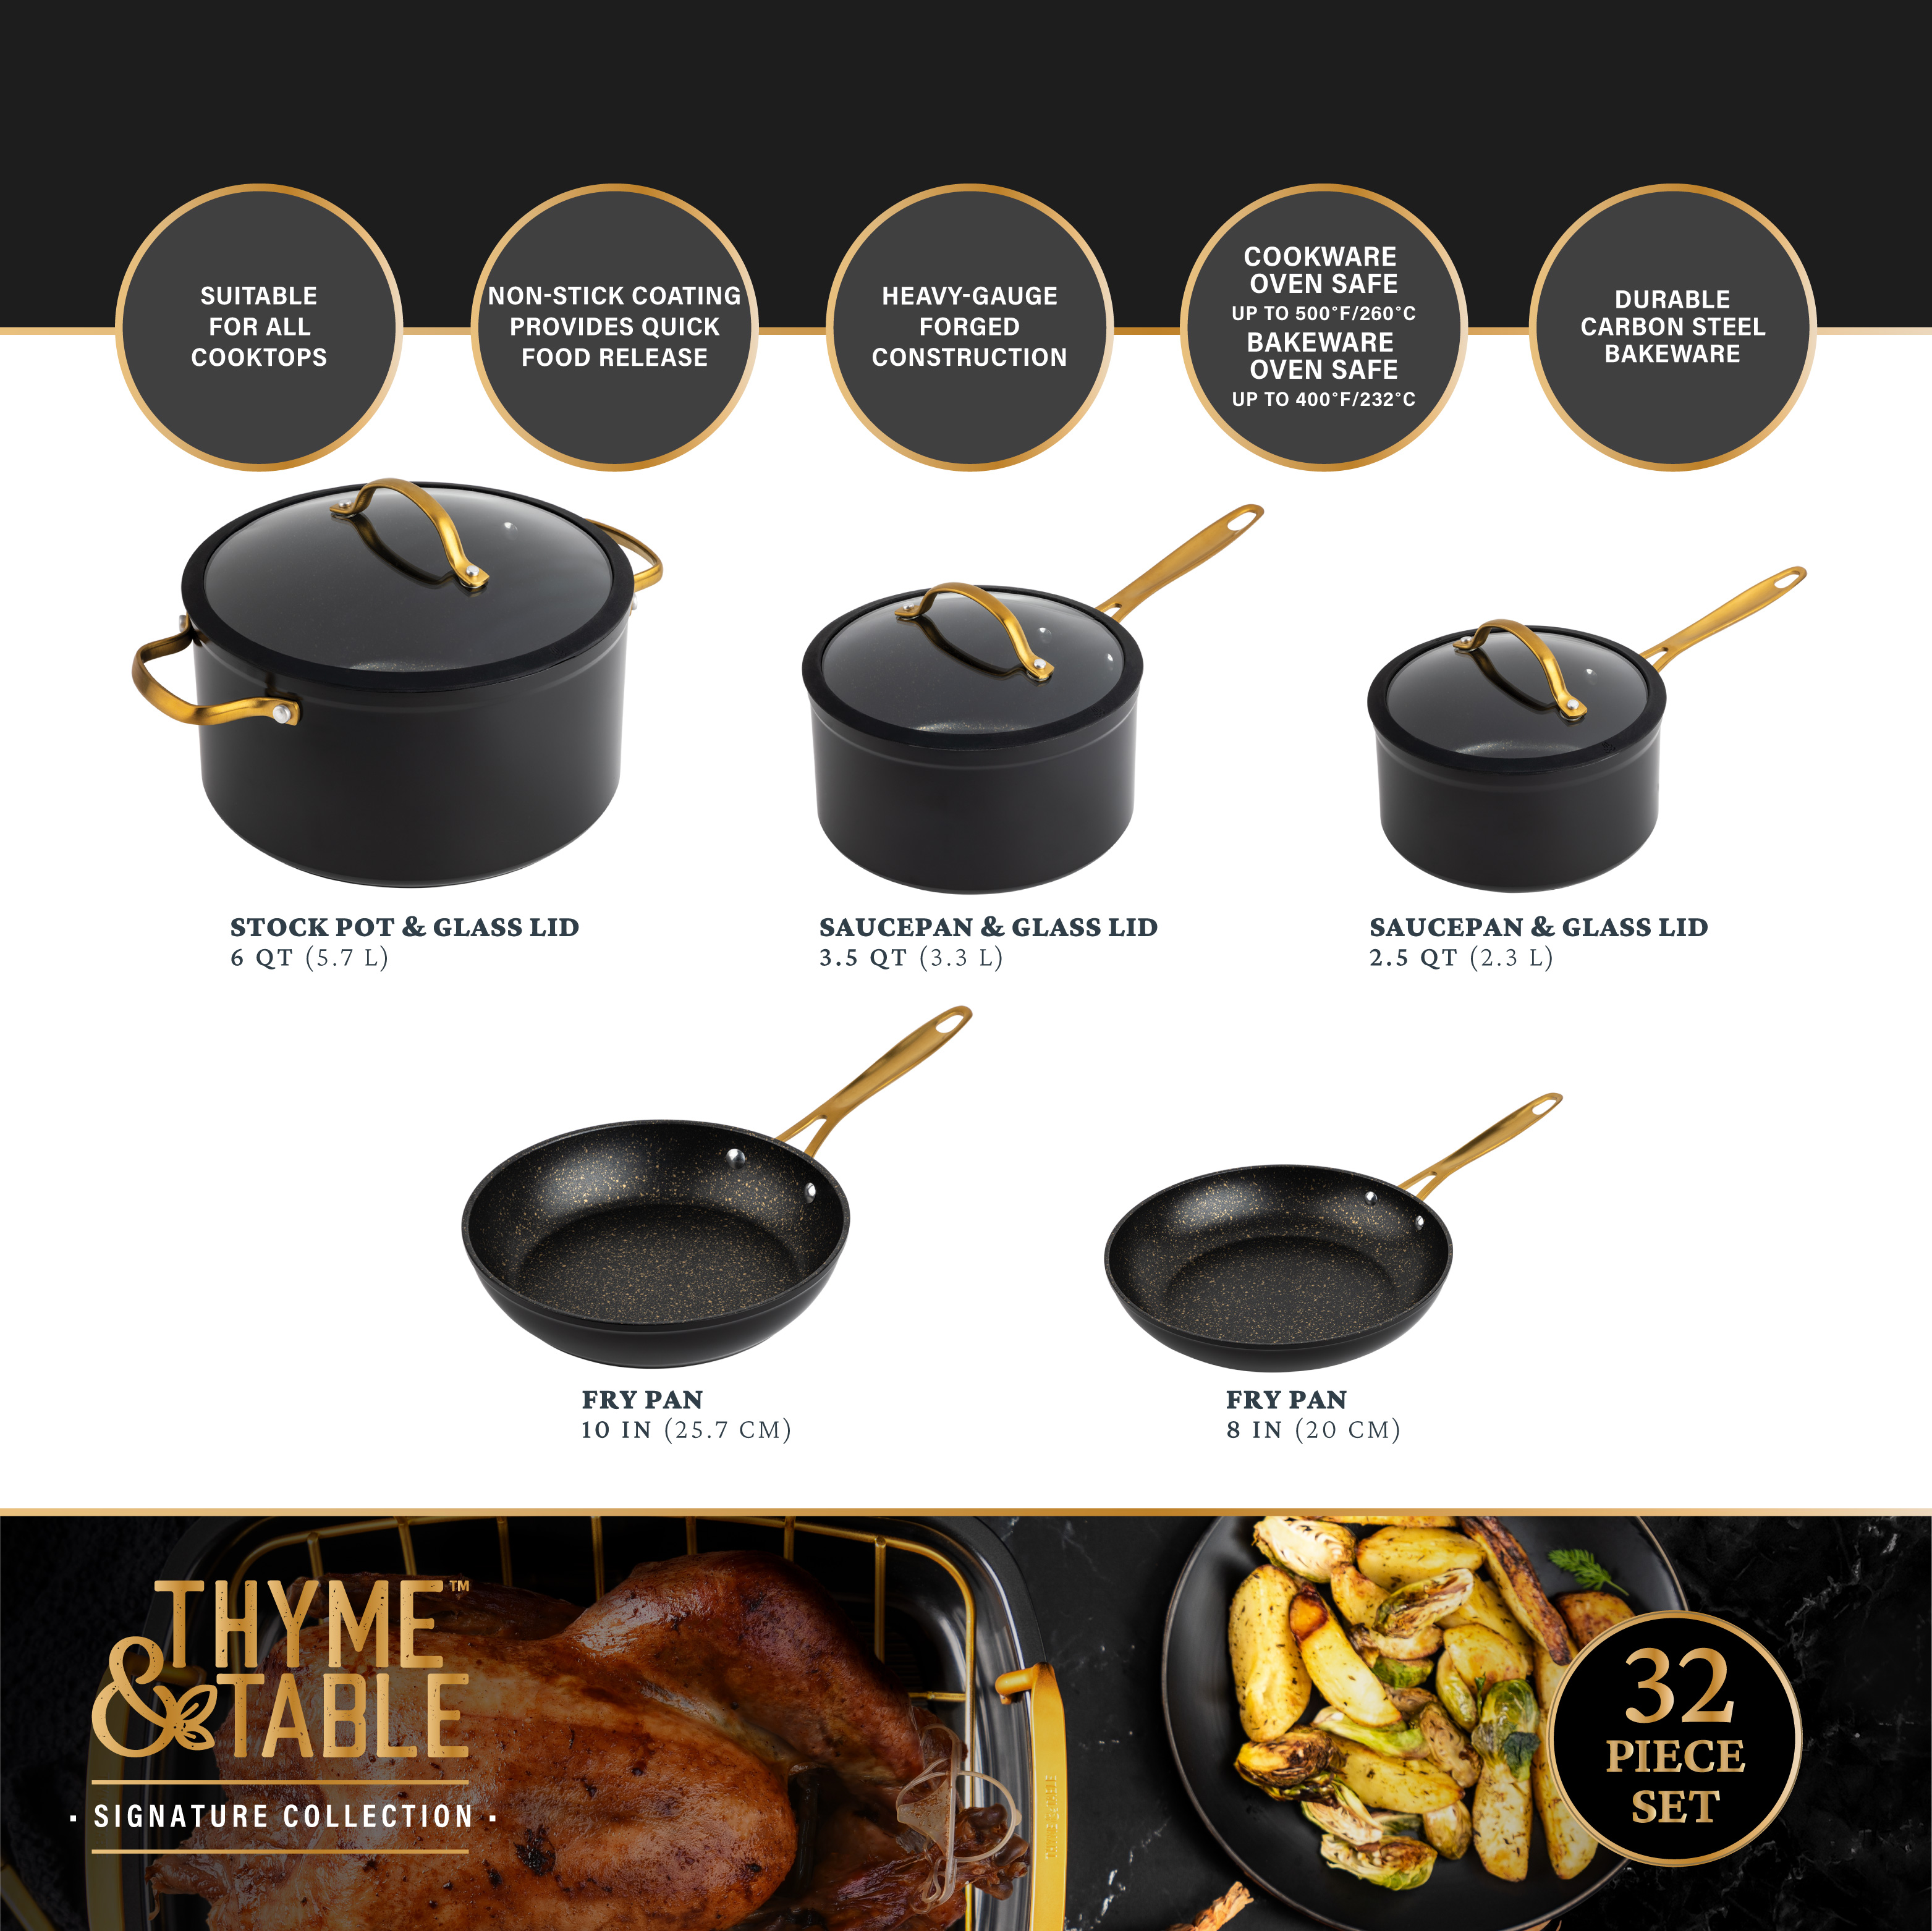 Thyme & Table 32-Piece Cookware & Bakeware Non-Stick Set, Black - image 2 of 6